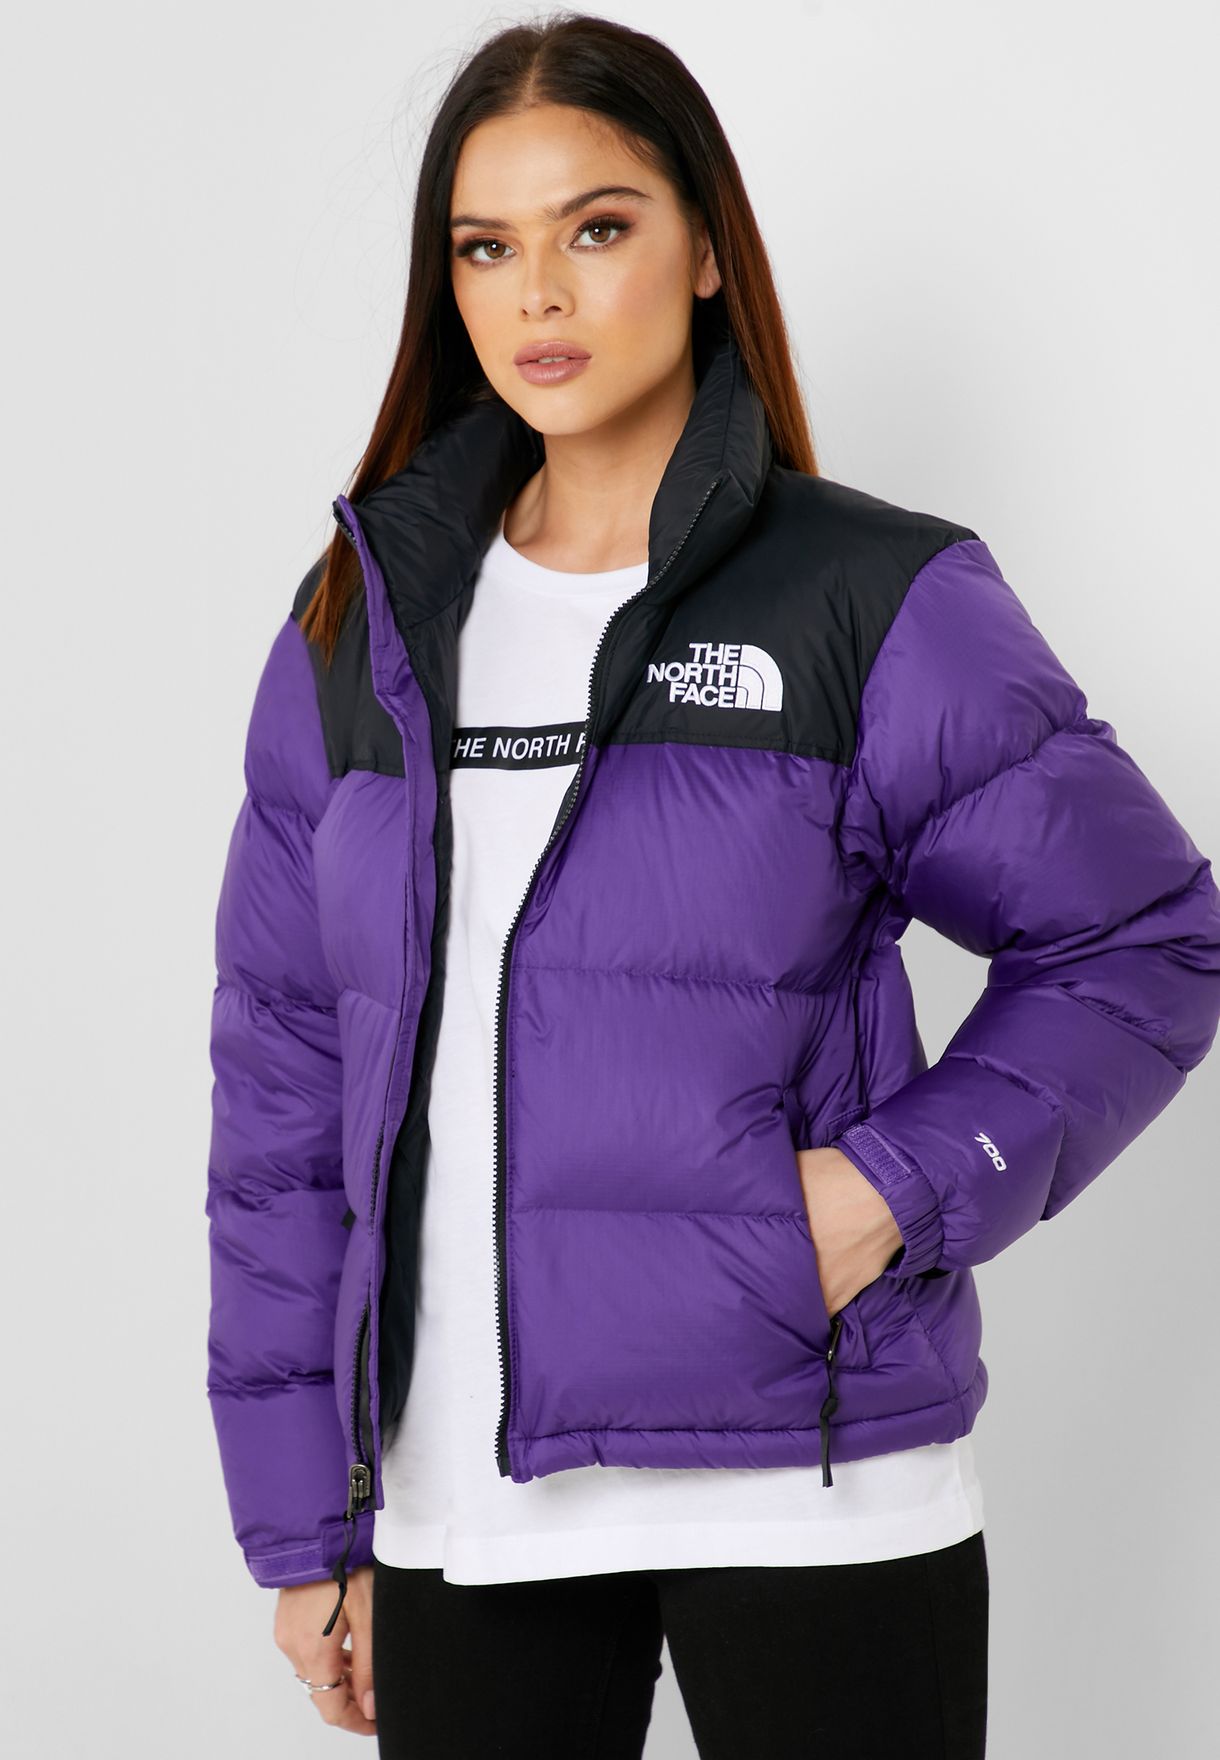 The North Face 1996 Purple Online Shopping For Women Men Kids Fashion Lifestyle Free Delivery Returns